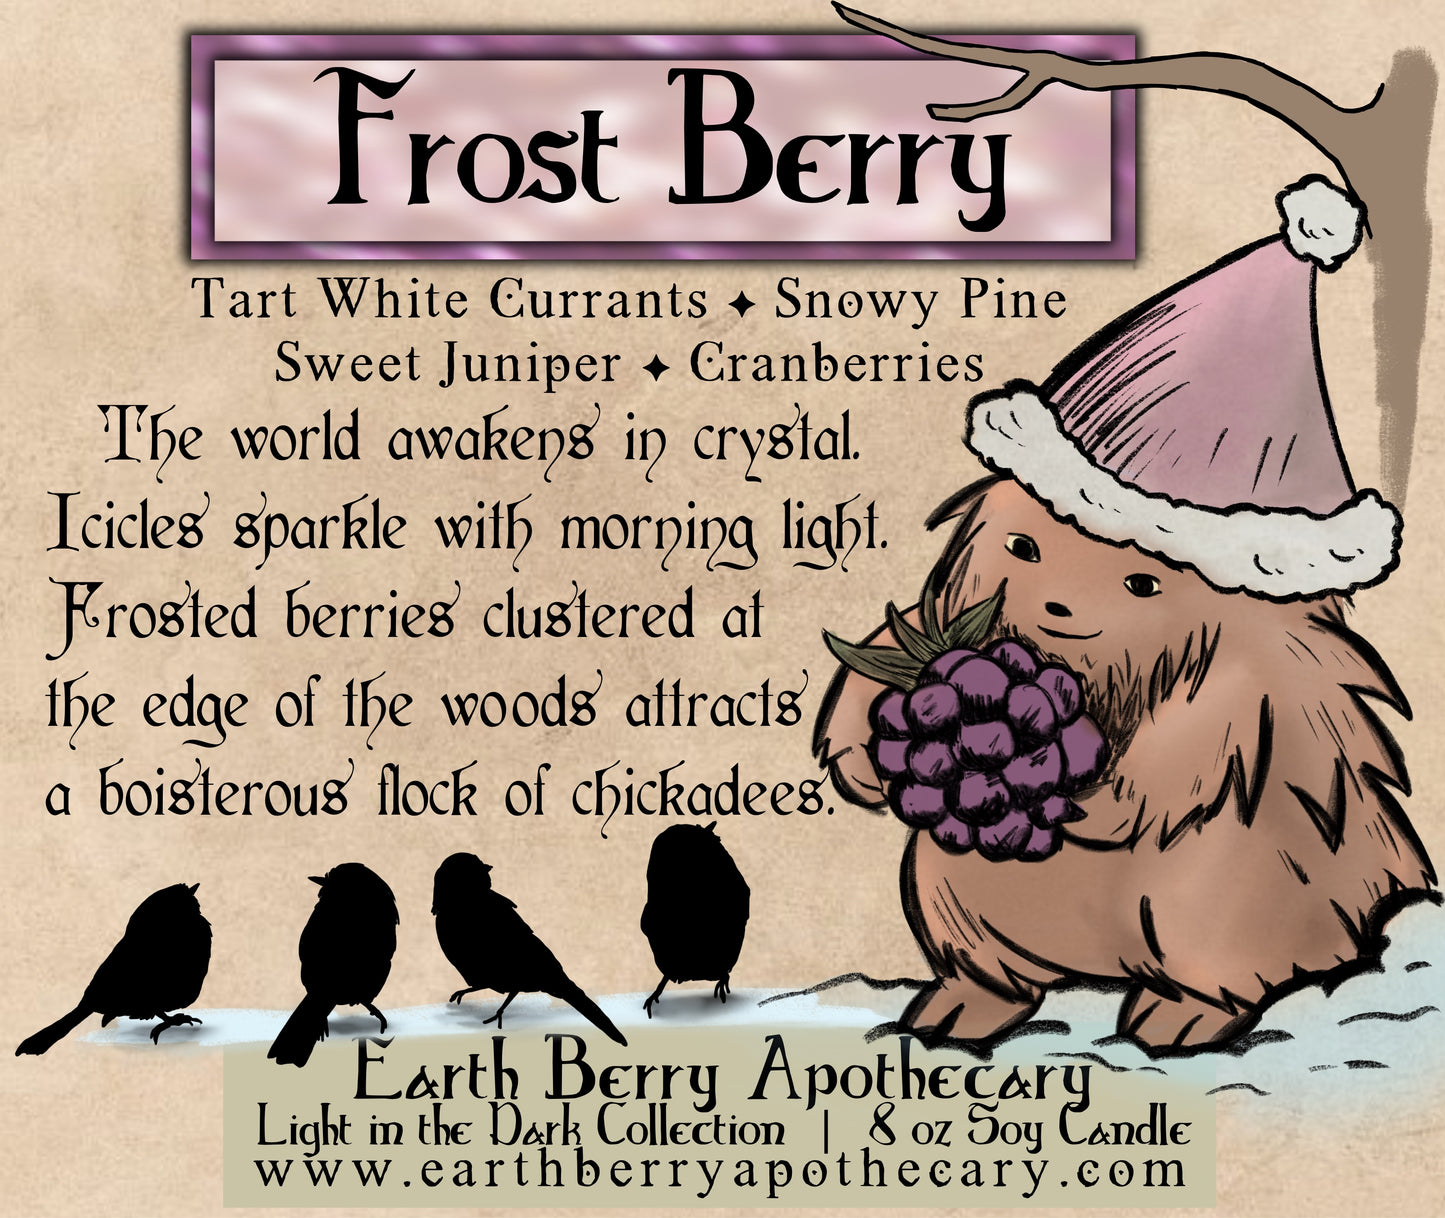 Frost berry fantasy soy candle scented with cranberries, currants, and pine. Always clean burning and nontoxic. A hedgehog witch holds a blackberry. Chickadees dance with joy.